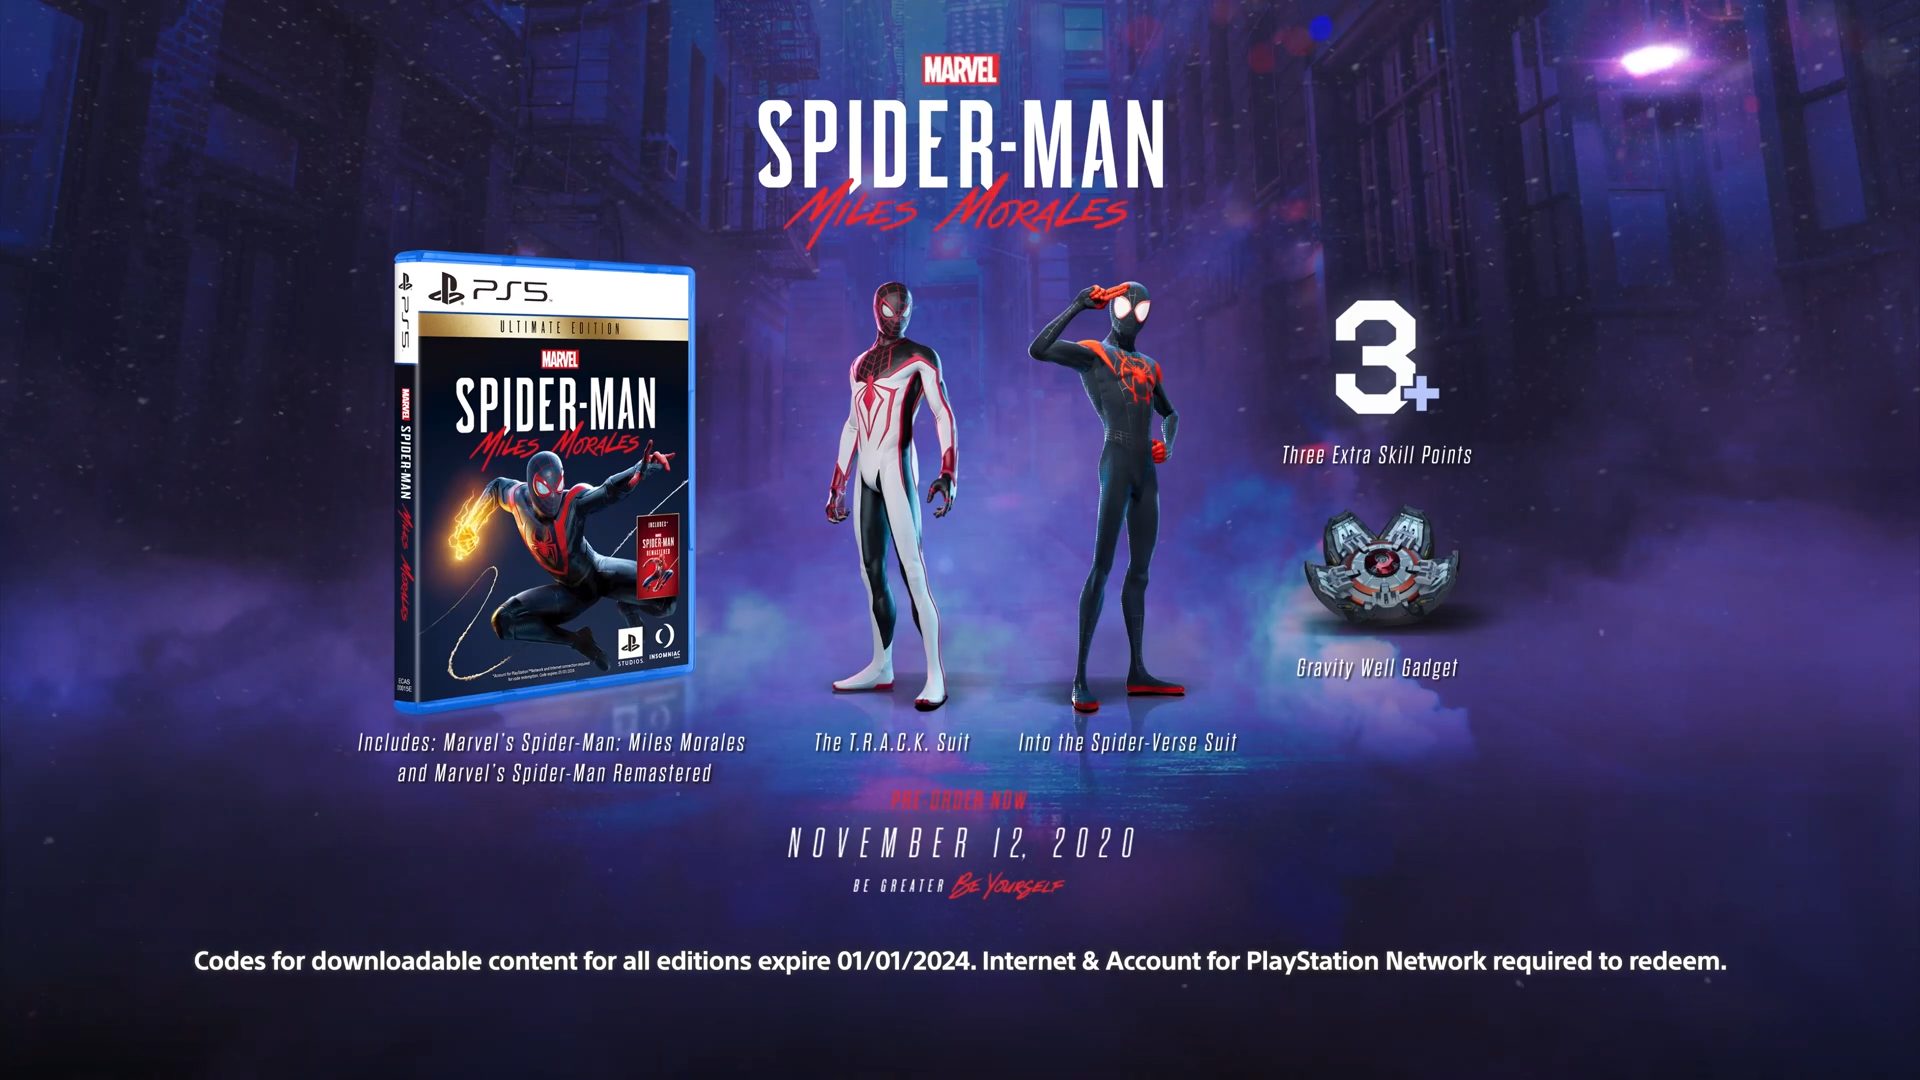  Marvel's Spider-Man: Miles Morales Ultimate Edition